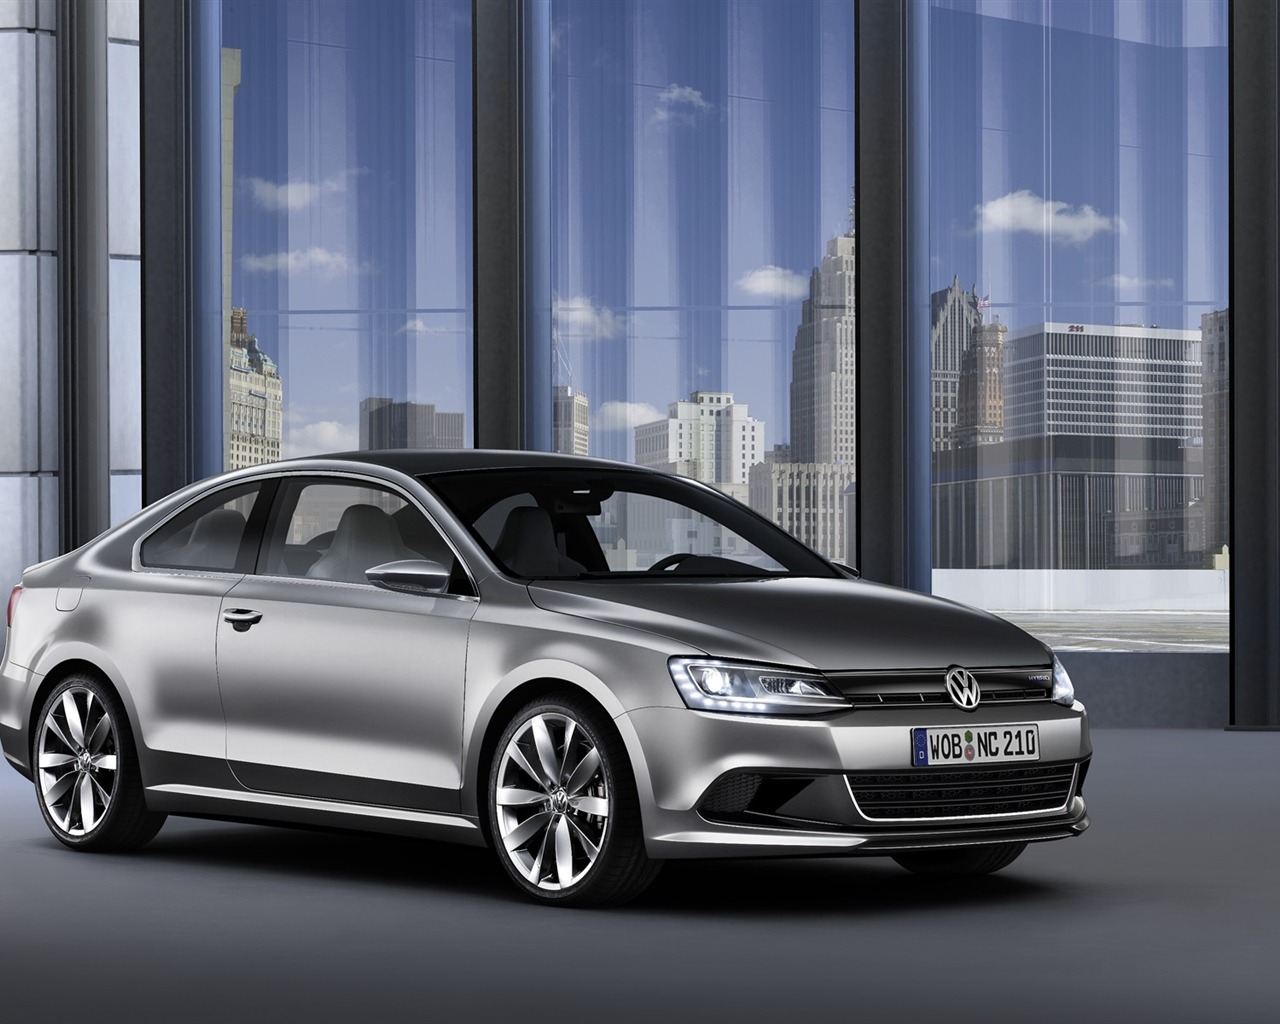 Volkswagen Concept Car tapety (2) #2 - 1280x1024